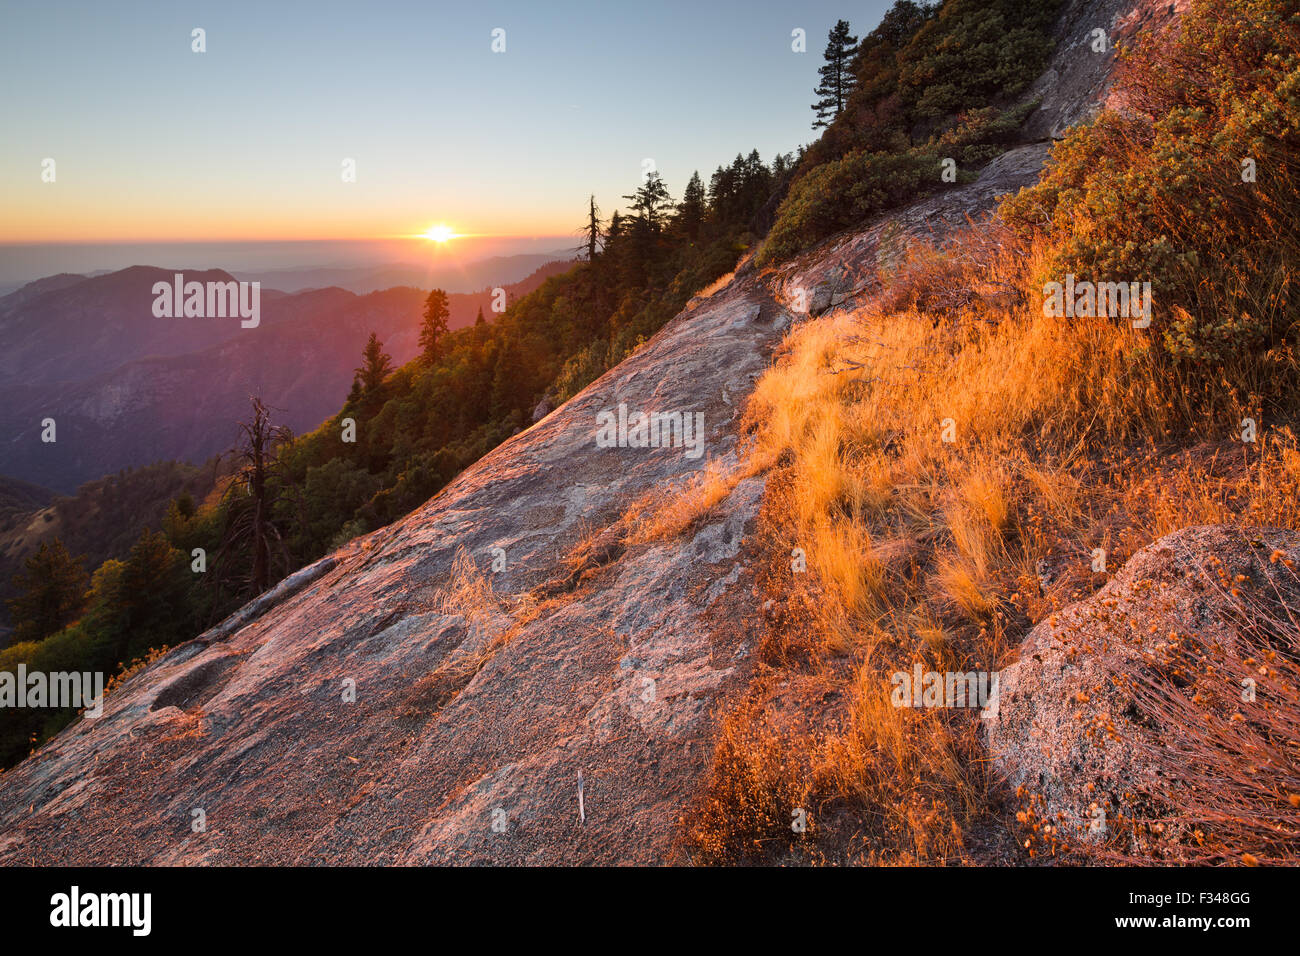 sunset over the Sierra Nevada from Hanging Rock, Sequoia National Park, California, USA Stock Photo